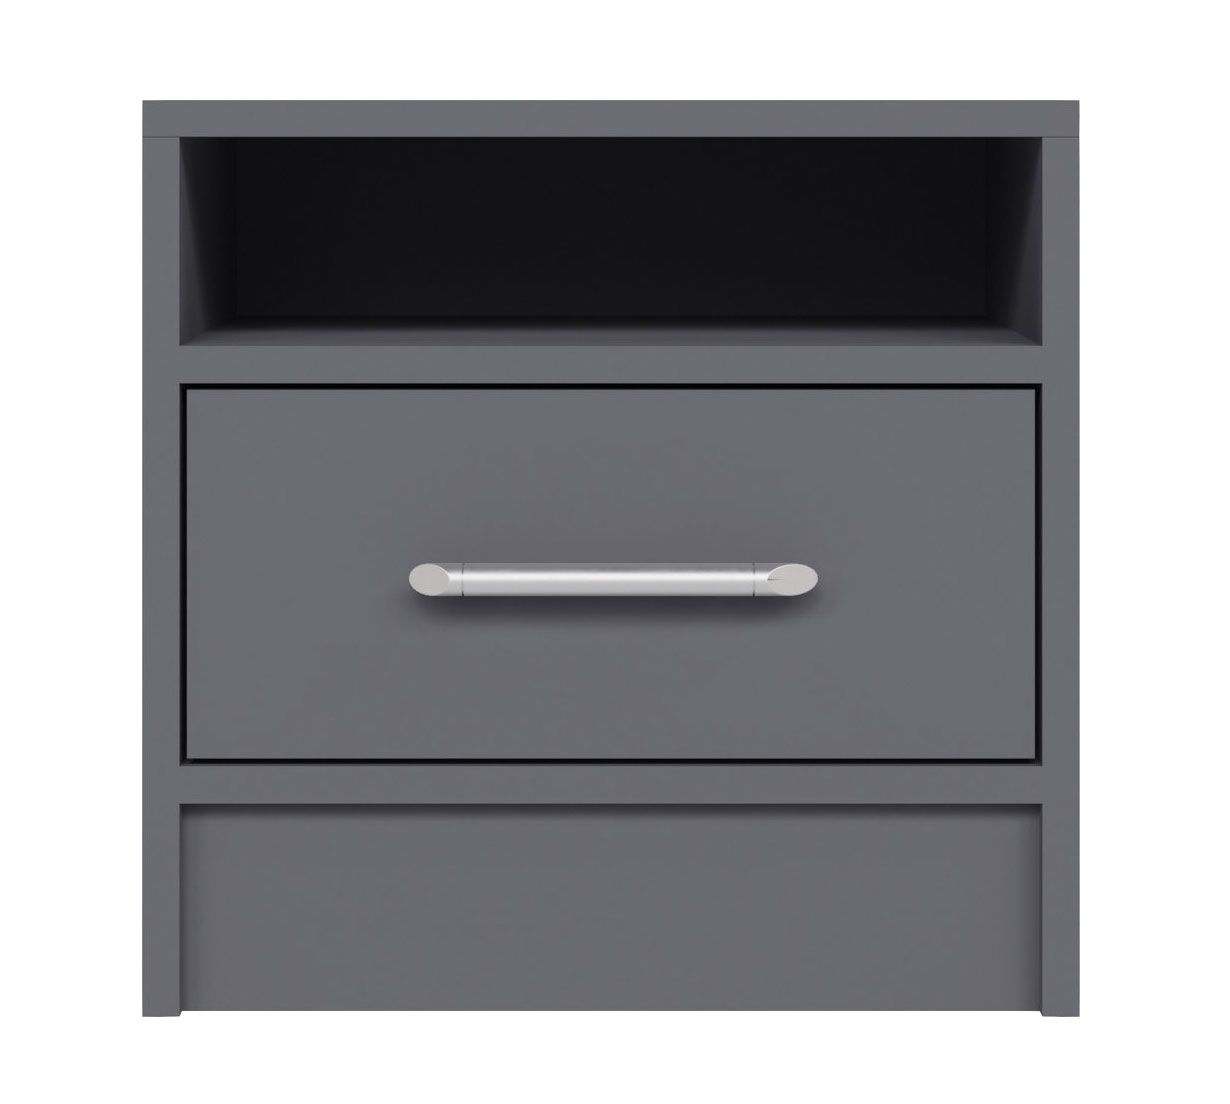 Nightstand with one drawer Hannut 51, color: anthracite - Dimensions: 40 x 40 x 35 cm (H x W x D)